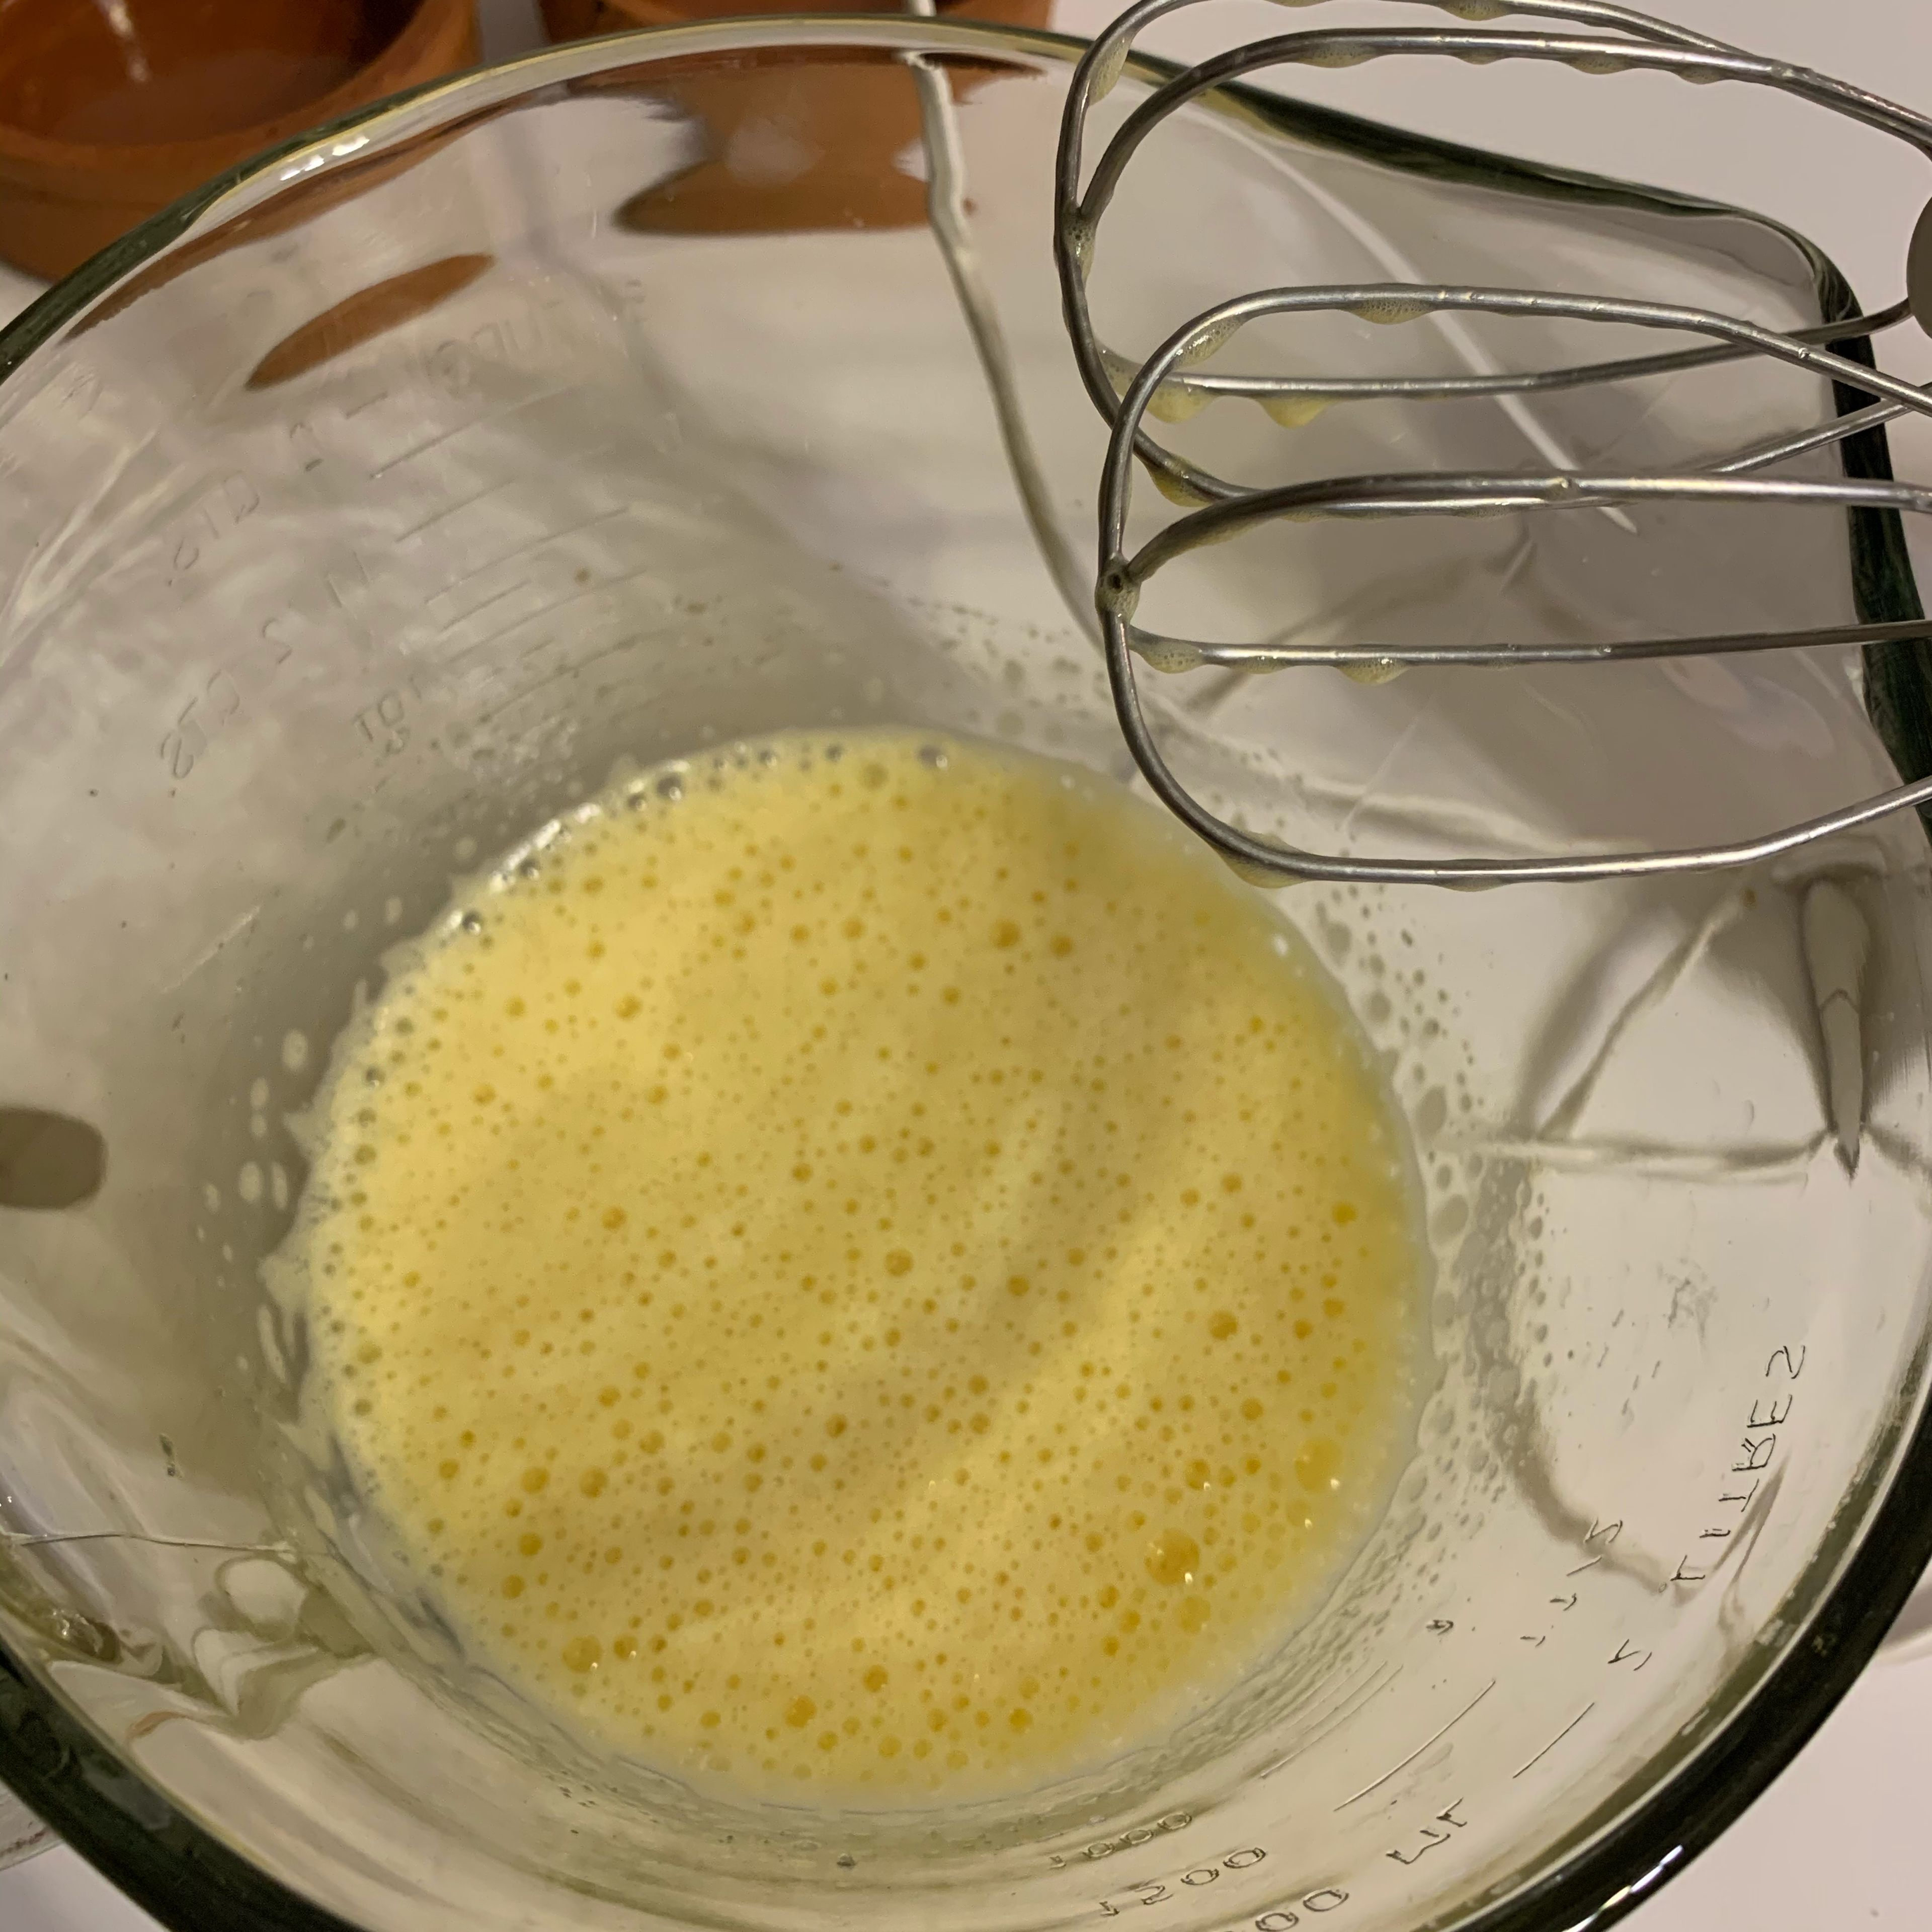 Whisk the eggs and sugar until it's foamy